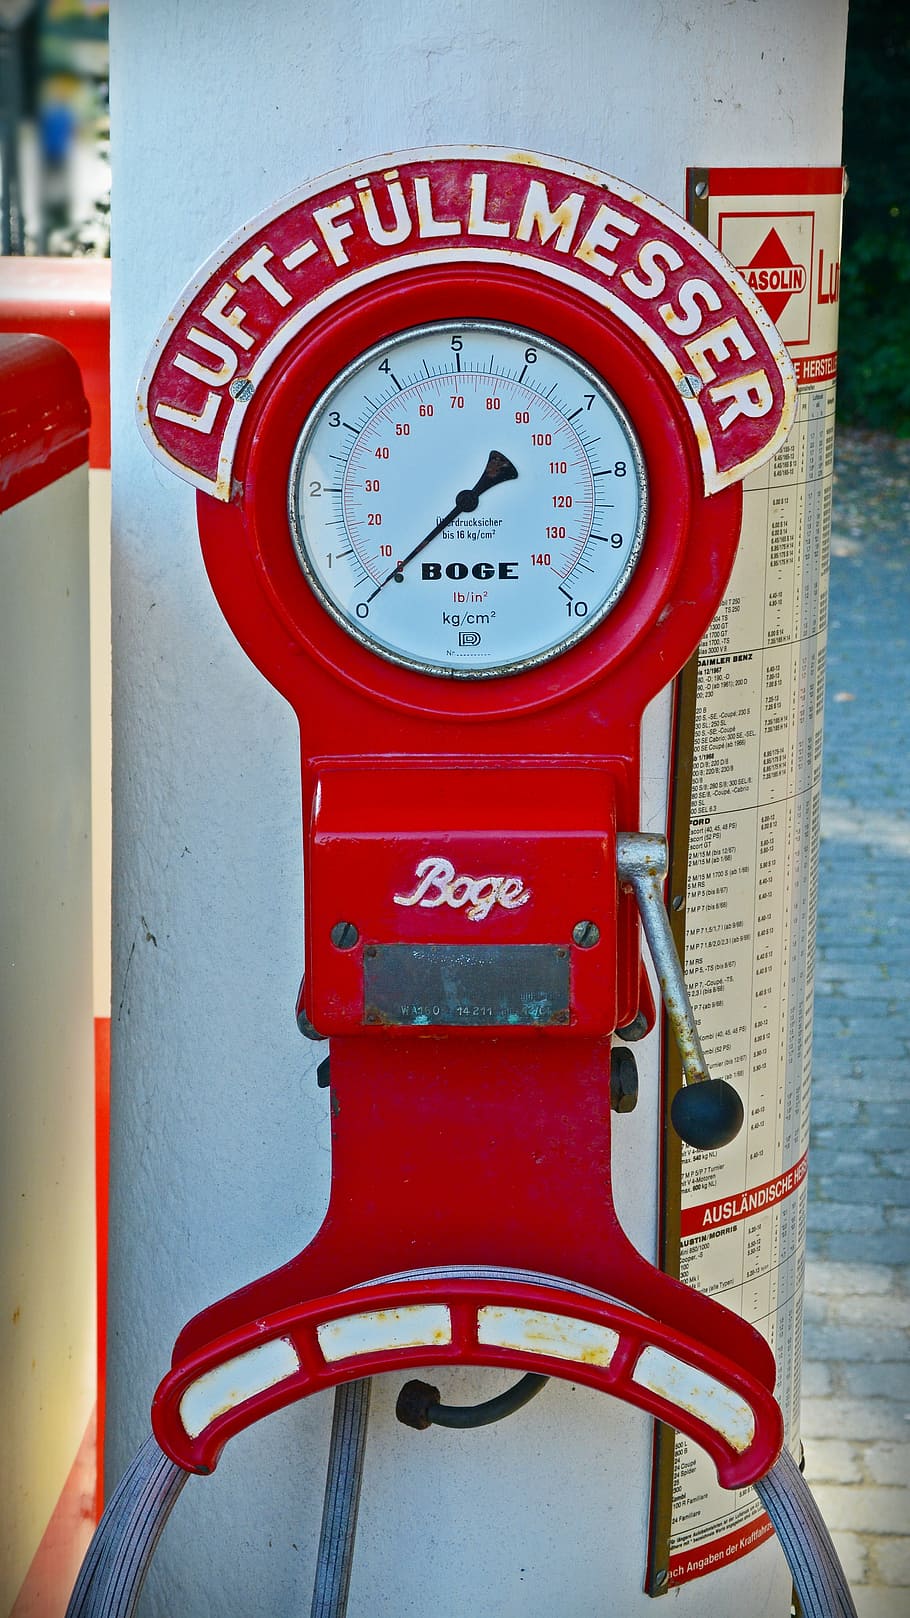 technology, gauge, petrol stations, old, show, fittings, machine, air pressure, red, communication